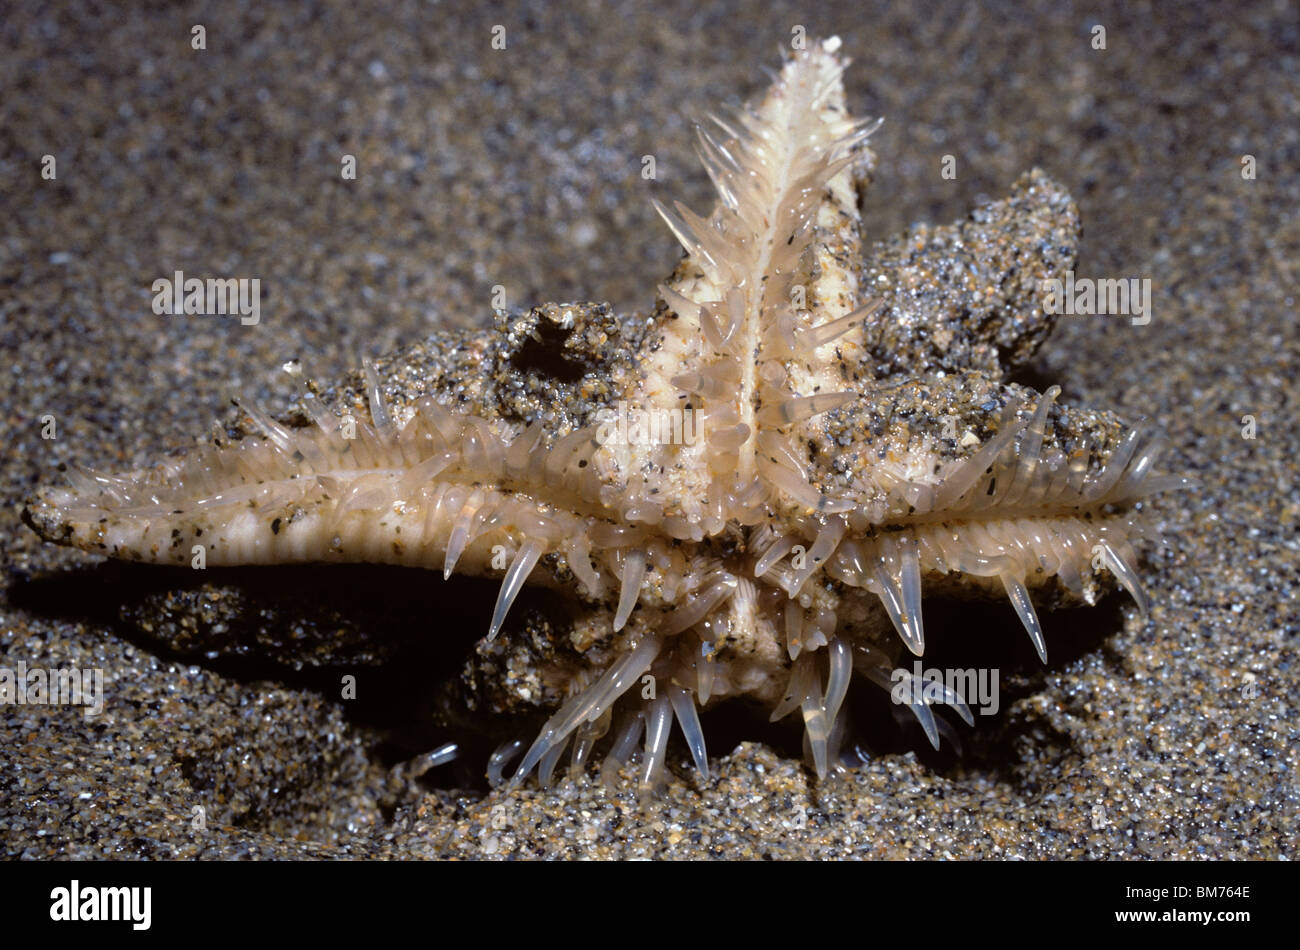 Sand star starfish (Astropecten irregularis: Astropectinidae) emerging from the sand as tide comes in, showing its tube-feet UK Stock Photo